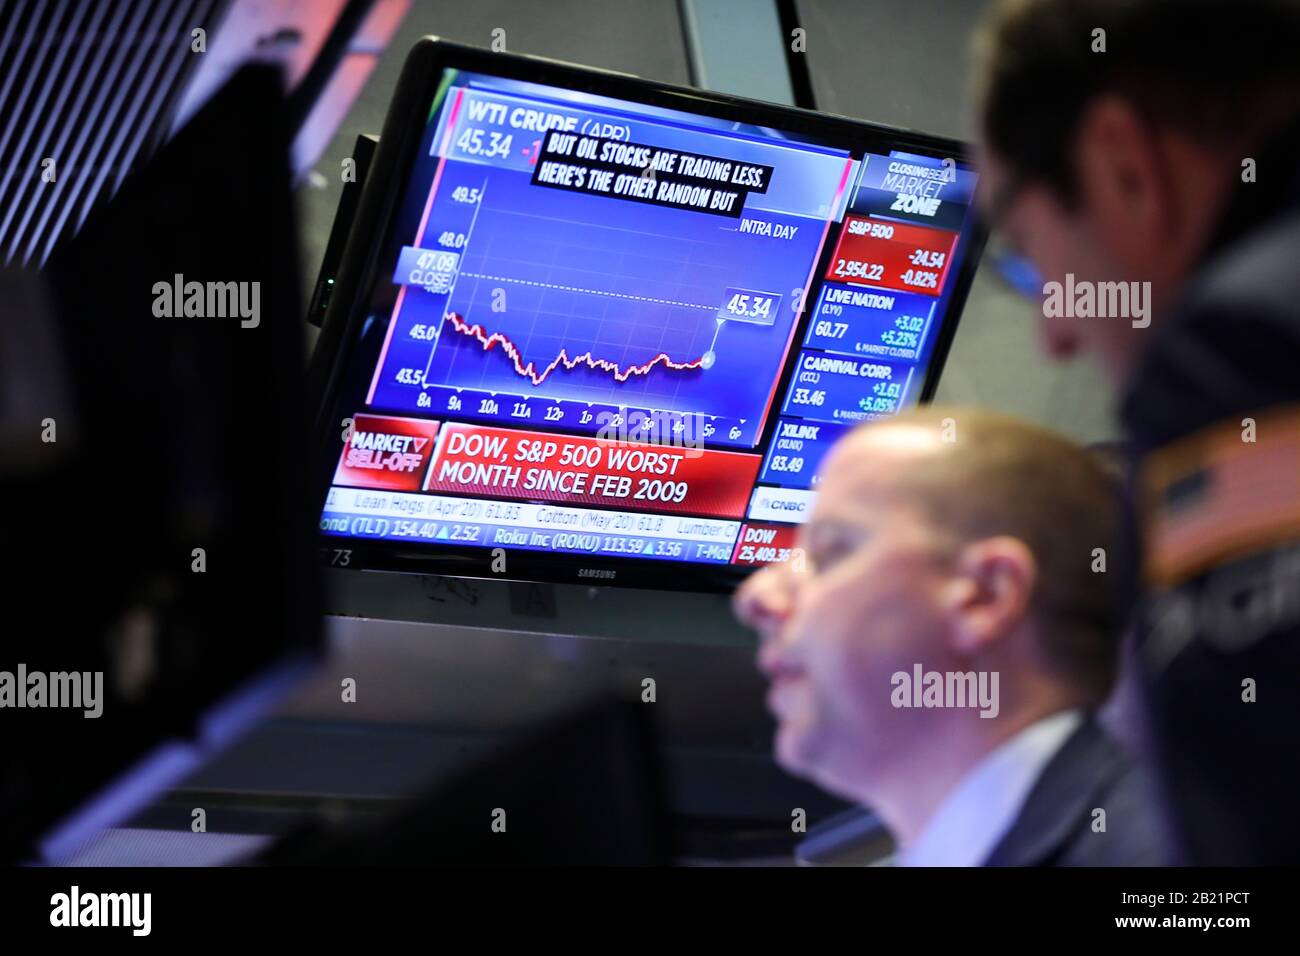 New York, USA. 28th Feb, 2020. Traders work at New York Stock Exchange in New York, the United States, on Feb. 28, 2020. U.S. stocks ended mixed on Friday. The Dow was down 1.39 percent to 25,409.36, the S&P 500 fell 0.82 percent to 2,954.22, and the Nasdaq was up 0.01 percent to 8,567.37. Credit: Wang Ying/Xinhua/Alamy Live News Stock Photo